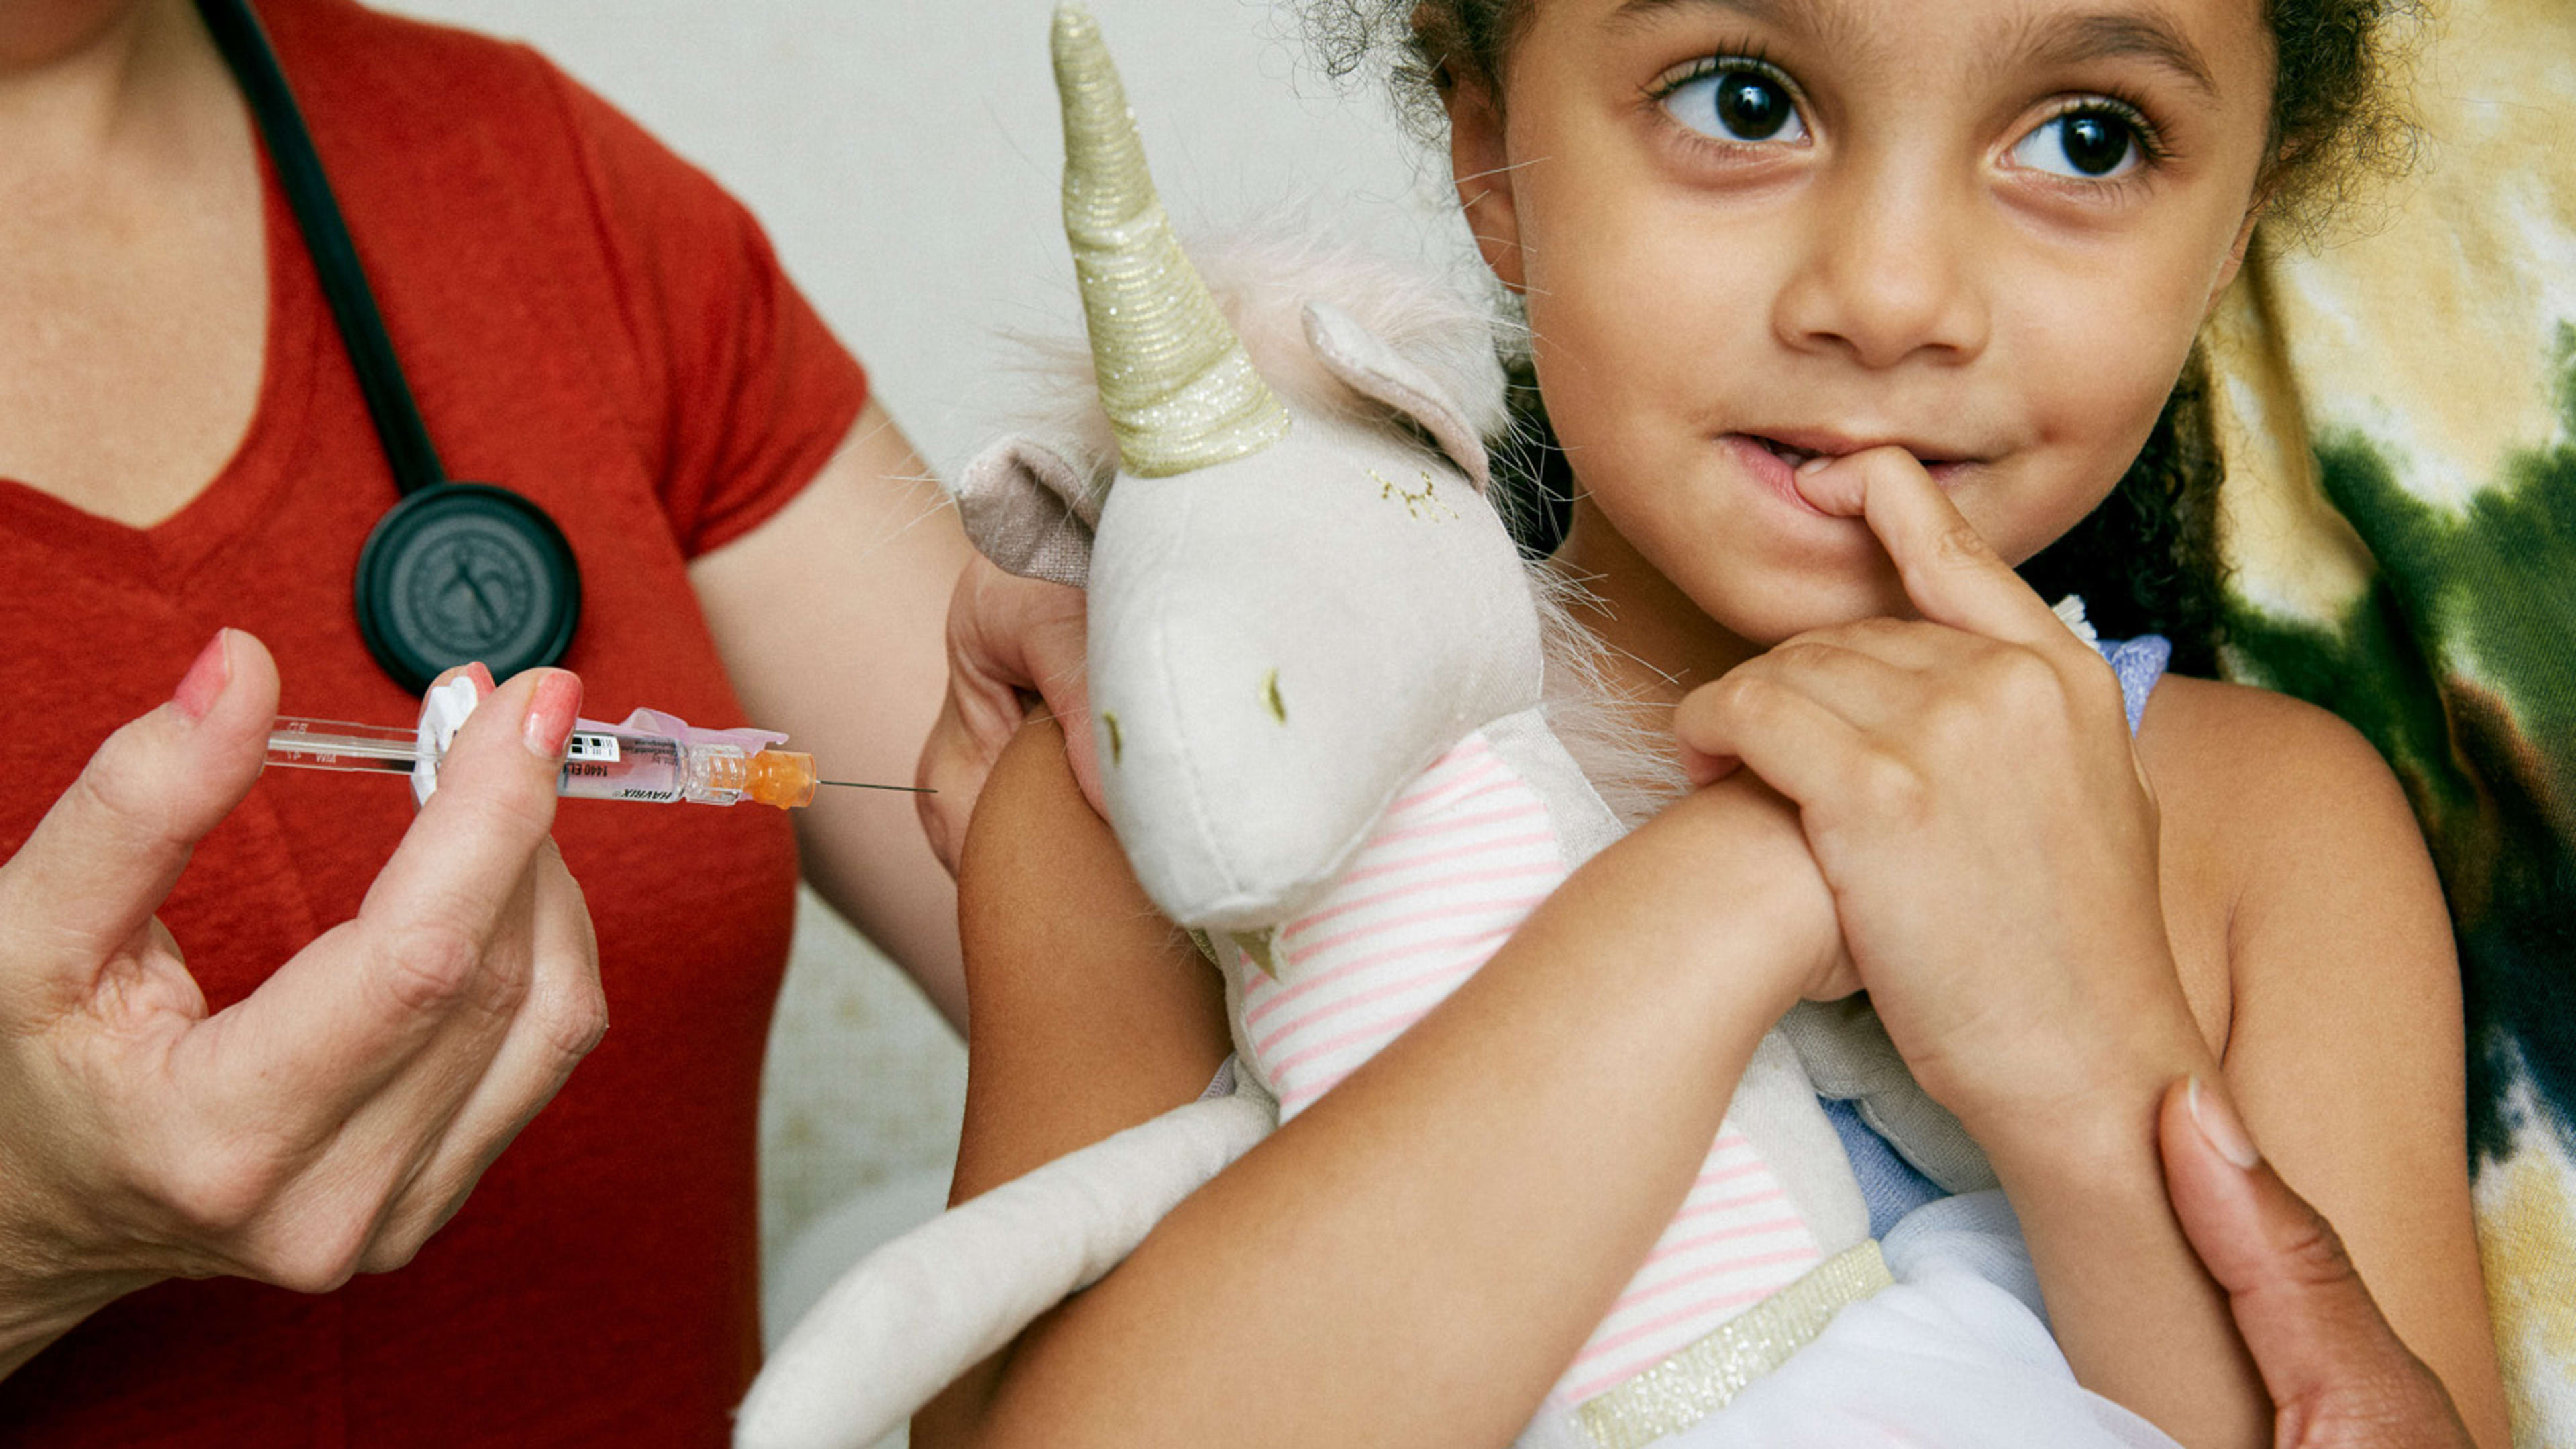 Stock photos for vaccines are dangerously bad, so this photographer redesigned them